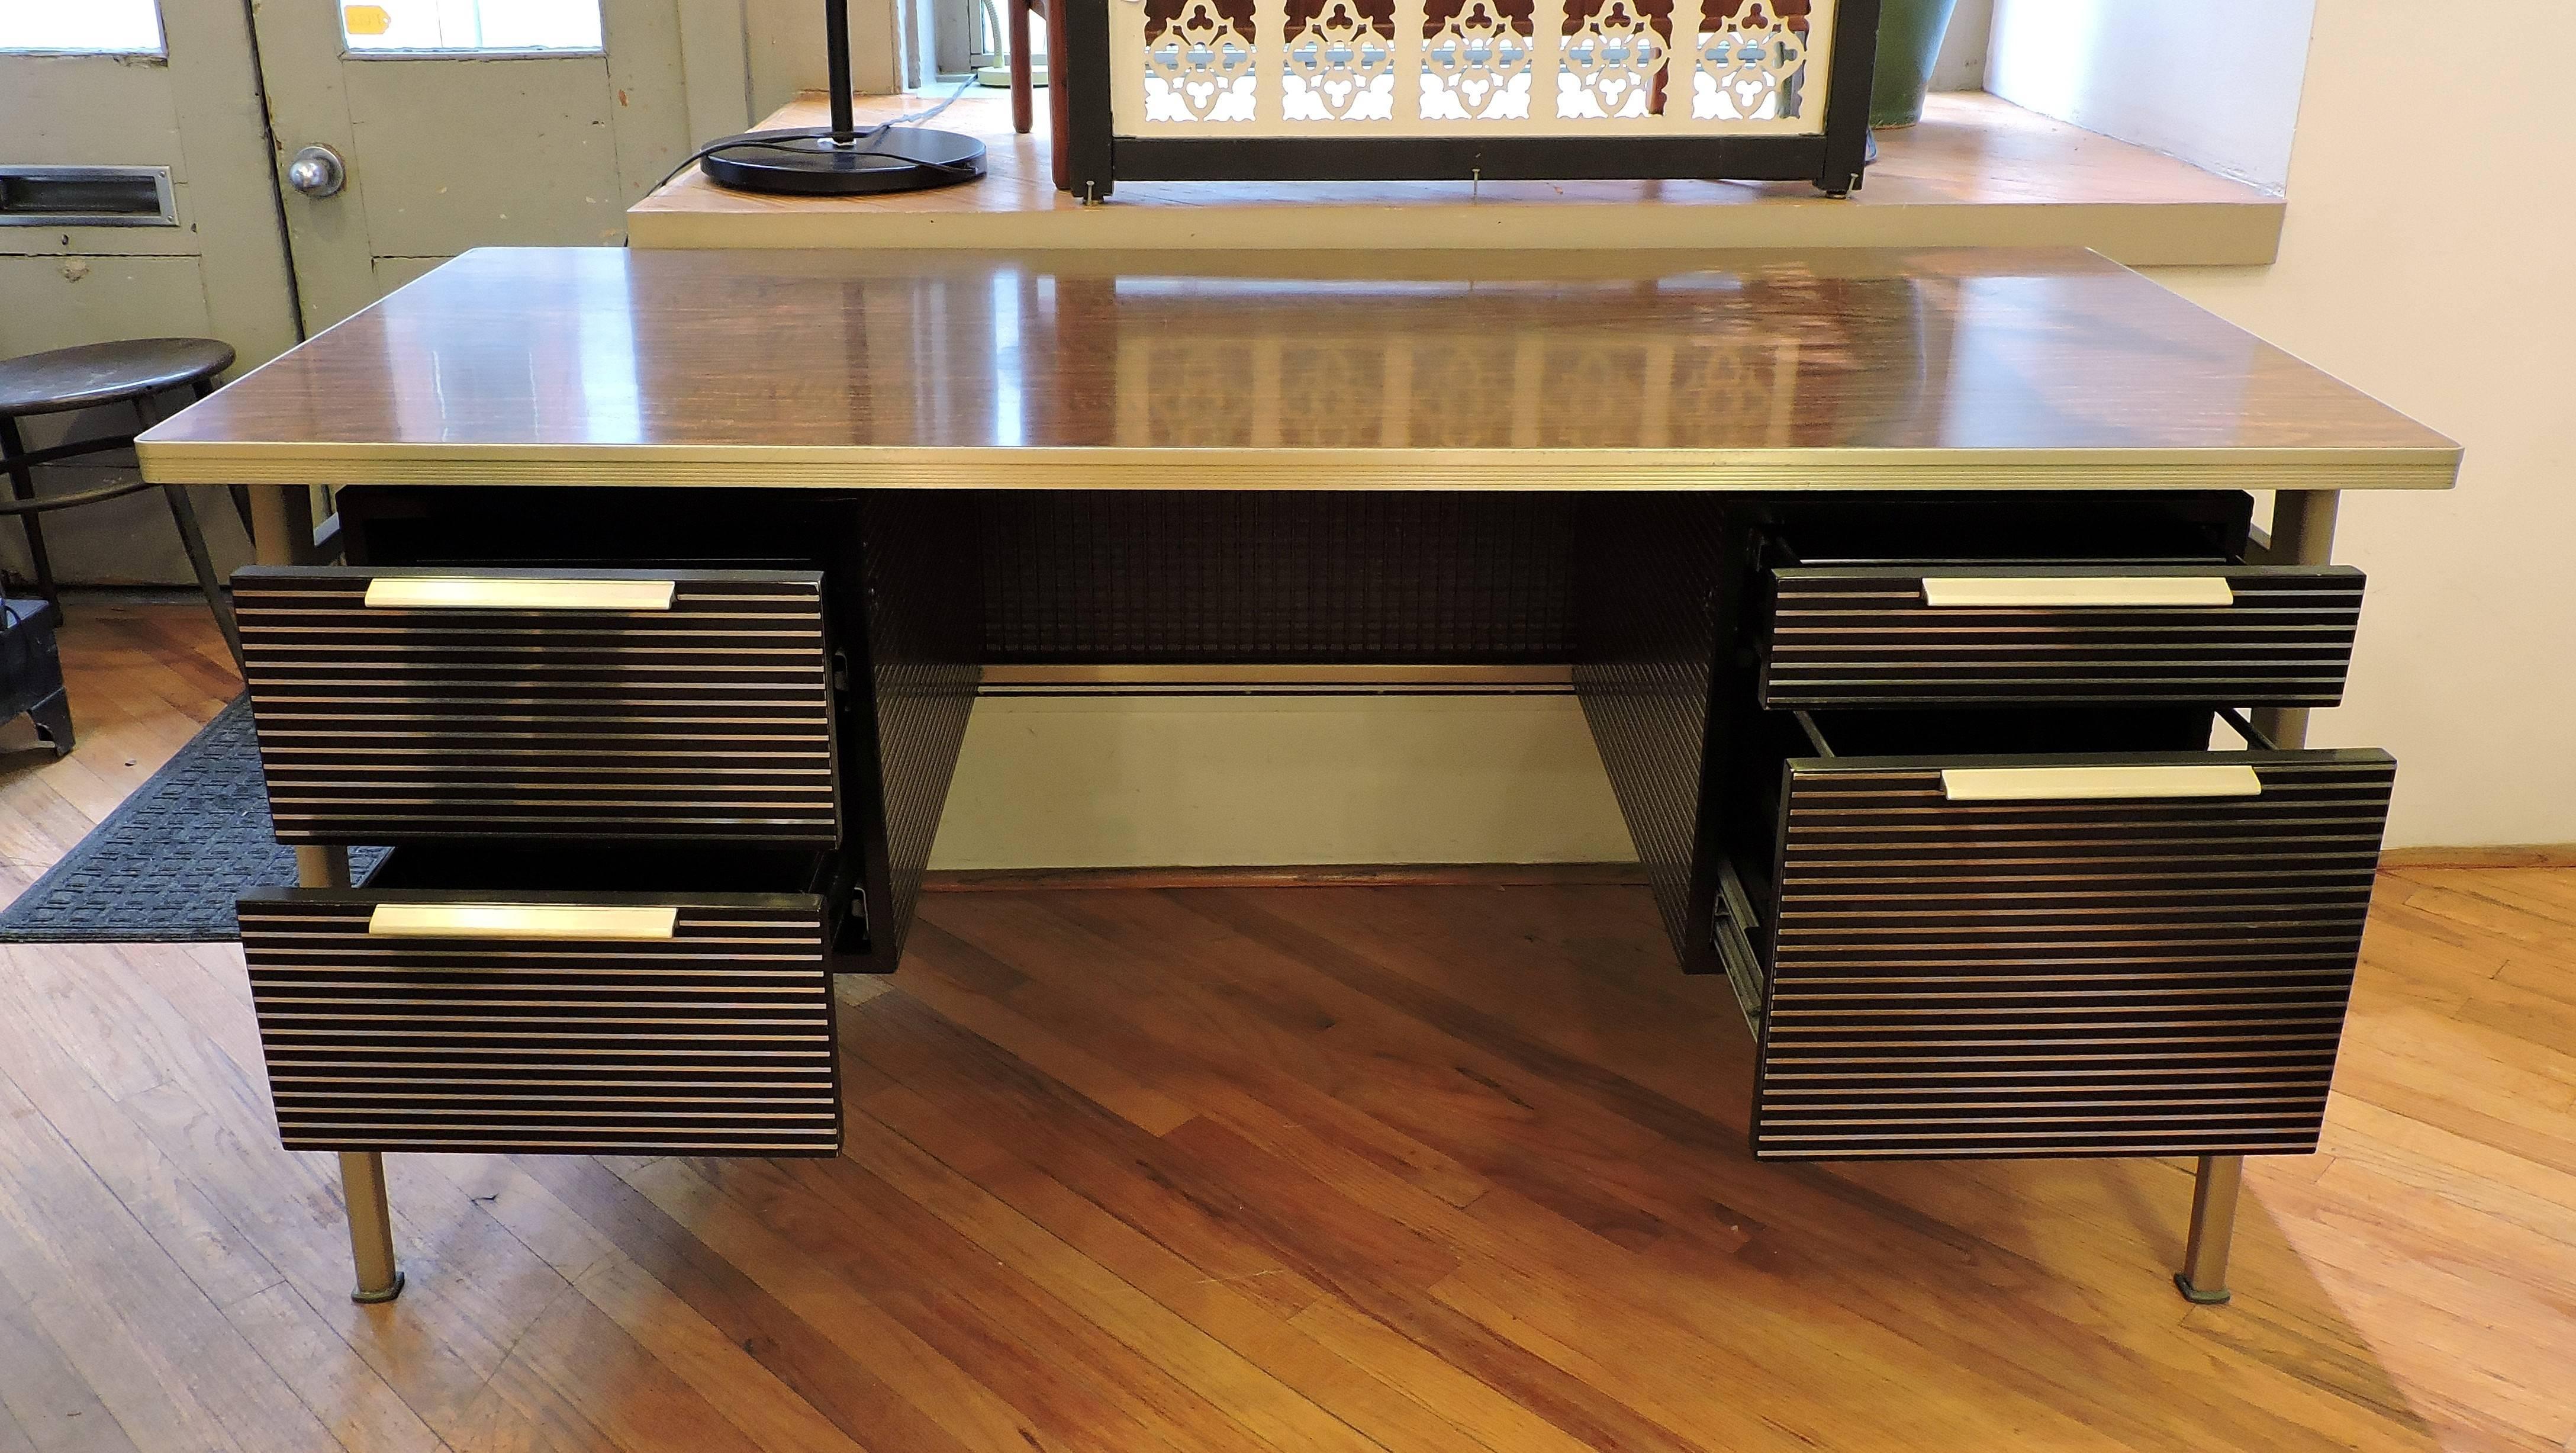 Very cool Mid-Century Modern desk designed by modern design architect Gordon Bunshaft (1909-1990) and manufactured by the General Fireproofing Company. This desk is made of aluminium with a woodgrain laminate top and has four drawers which includes